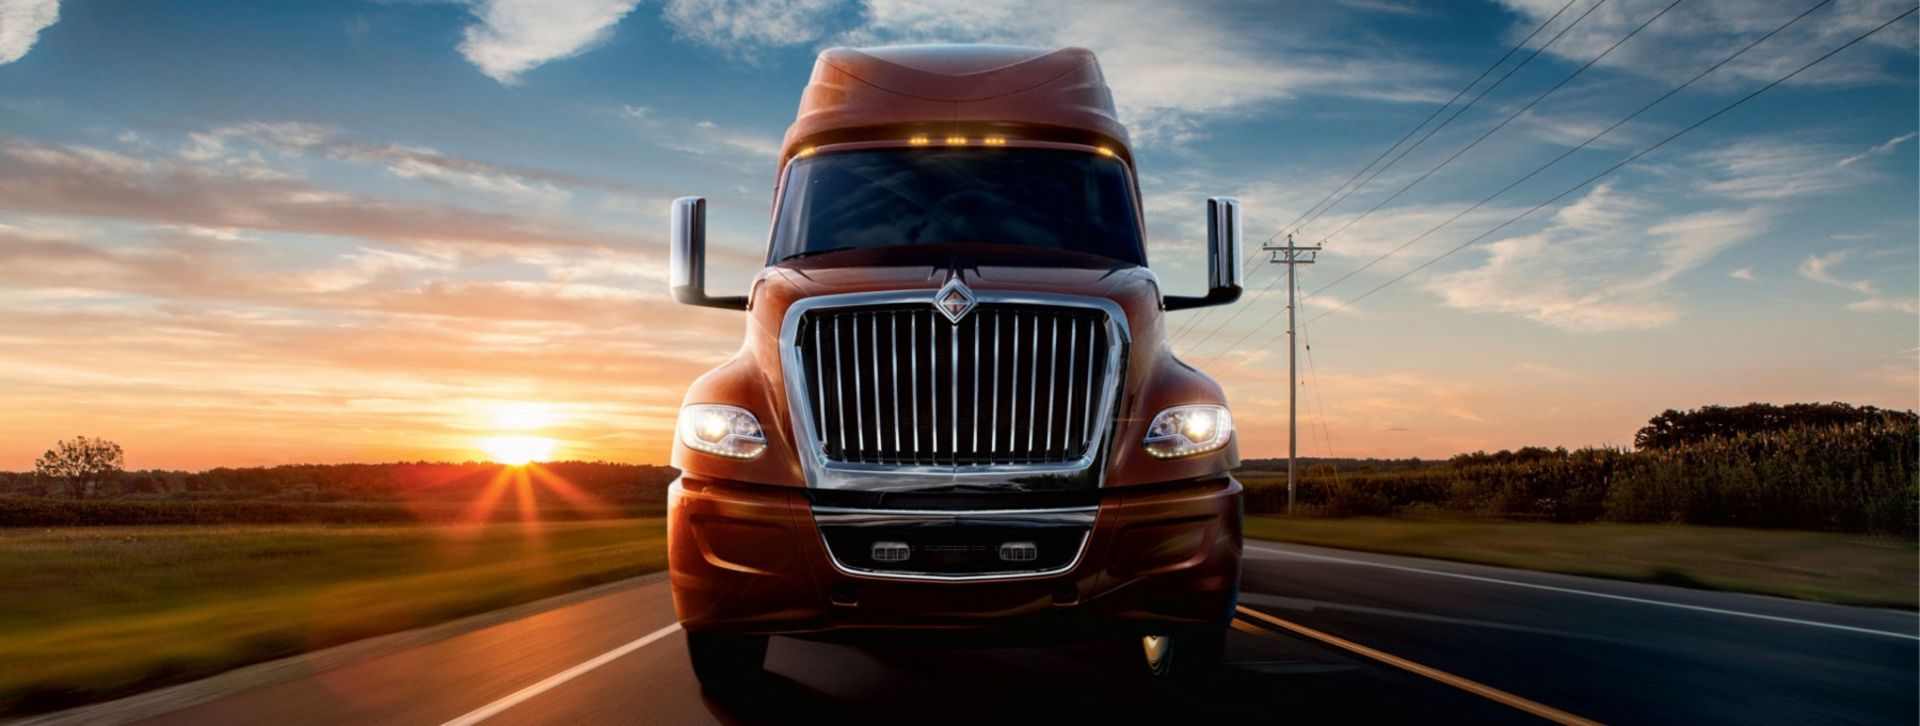 Image of a red NAVISTAR truck on the road in front of a sunrise